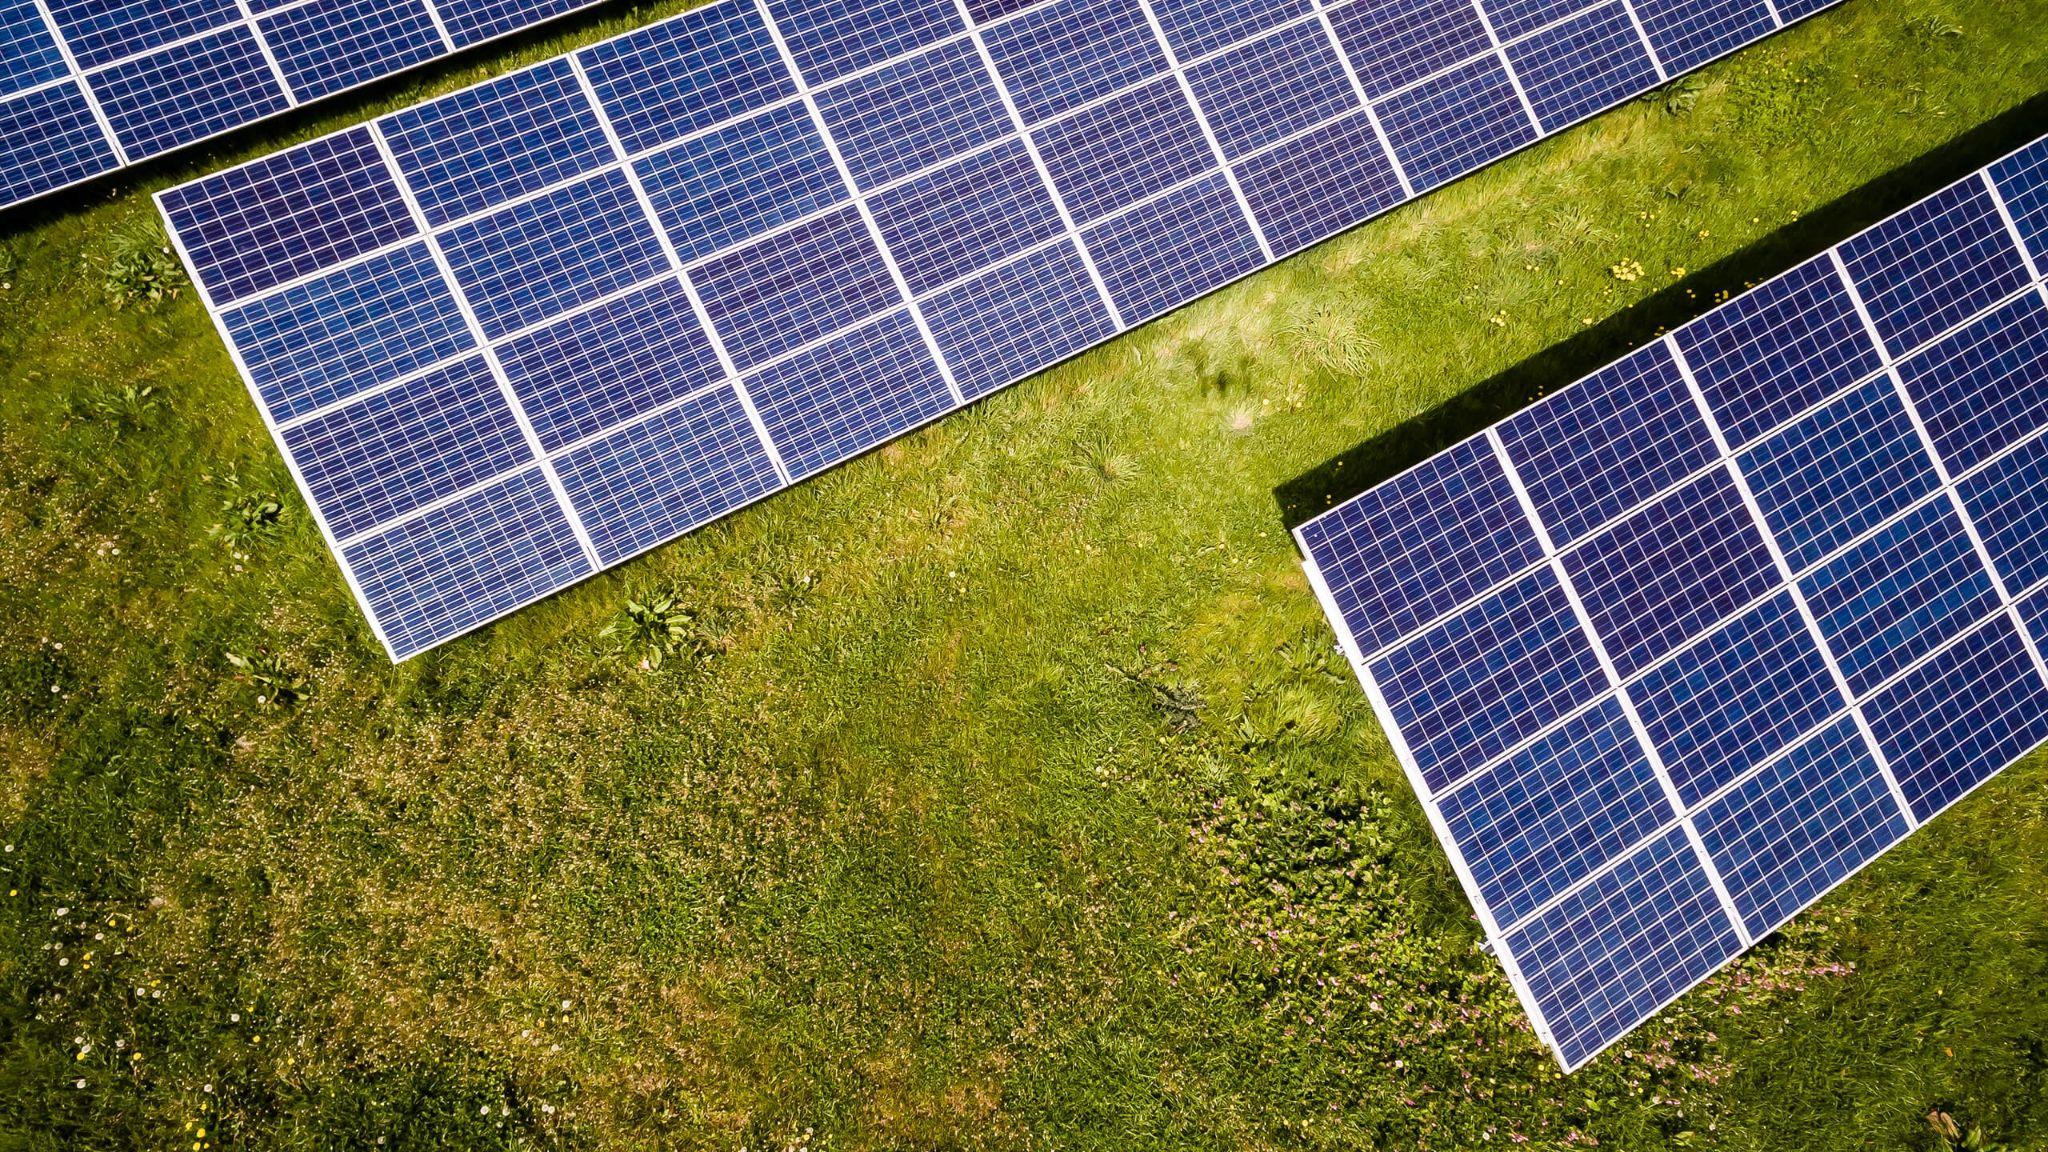 5 Myths about Solar Panels that You Must Avoid